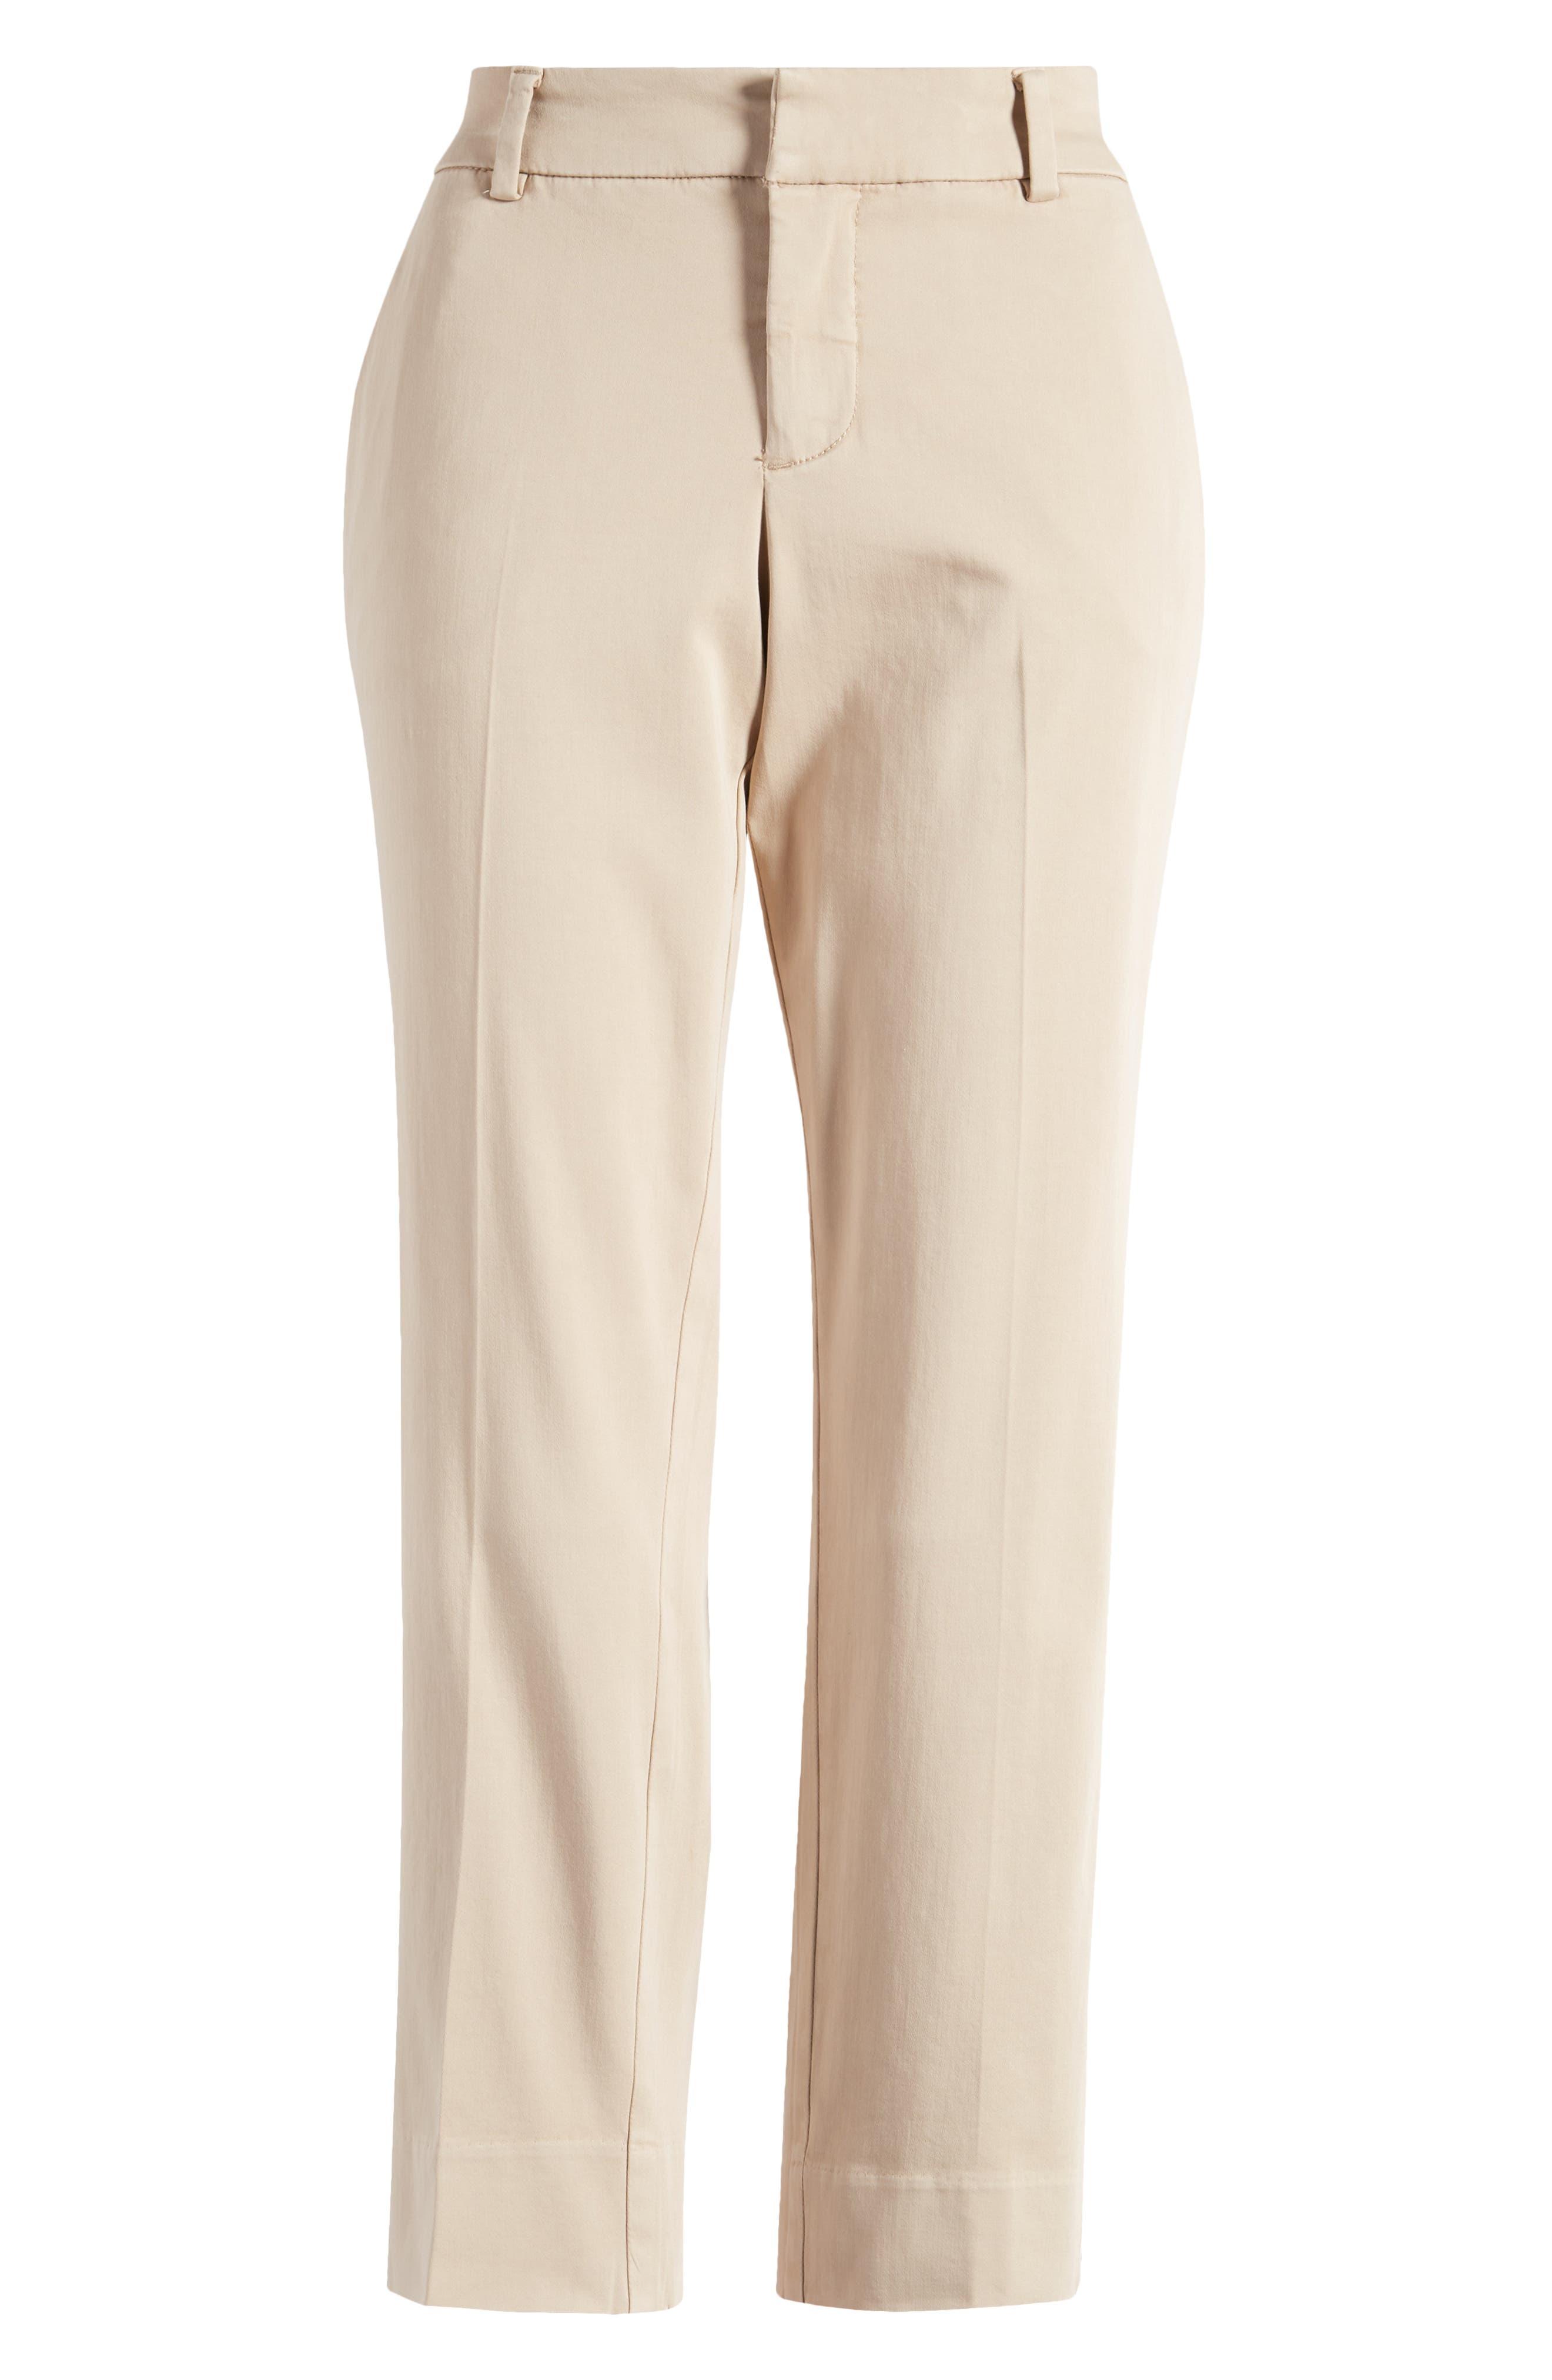 Spanx White Stretch Twill Cropped Wide Leg Pant